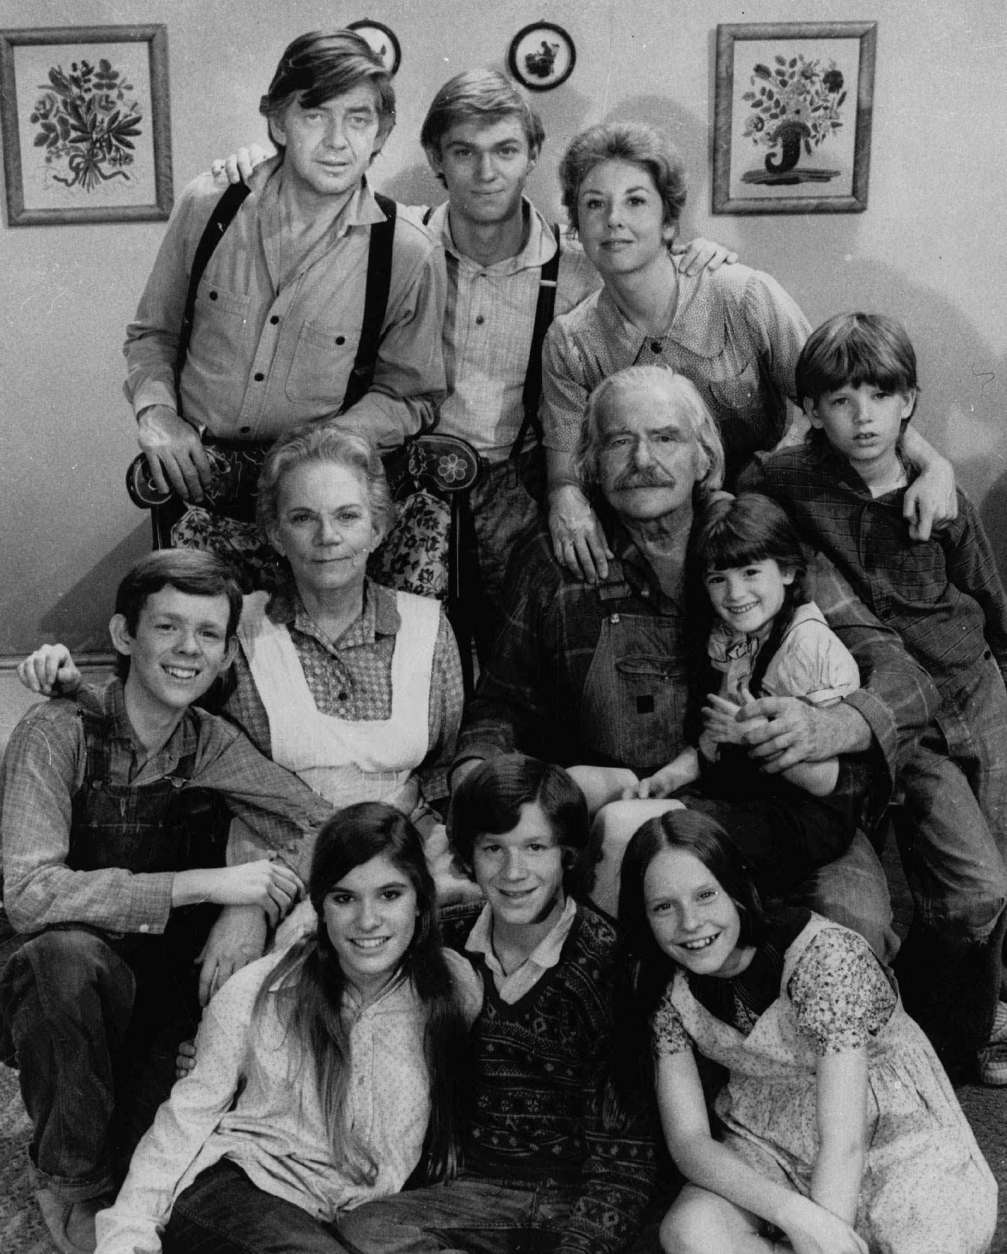 A 1975 photo of the cast of the television series "The Waltons", including Richard Thomas (top row, center) and Michael Learned (top row, right). (AP Photo)